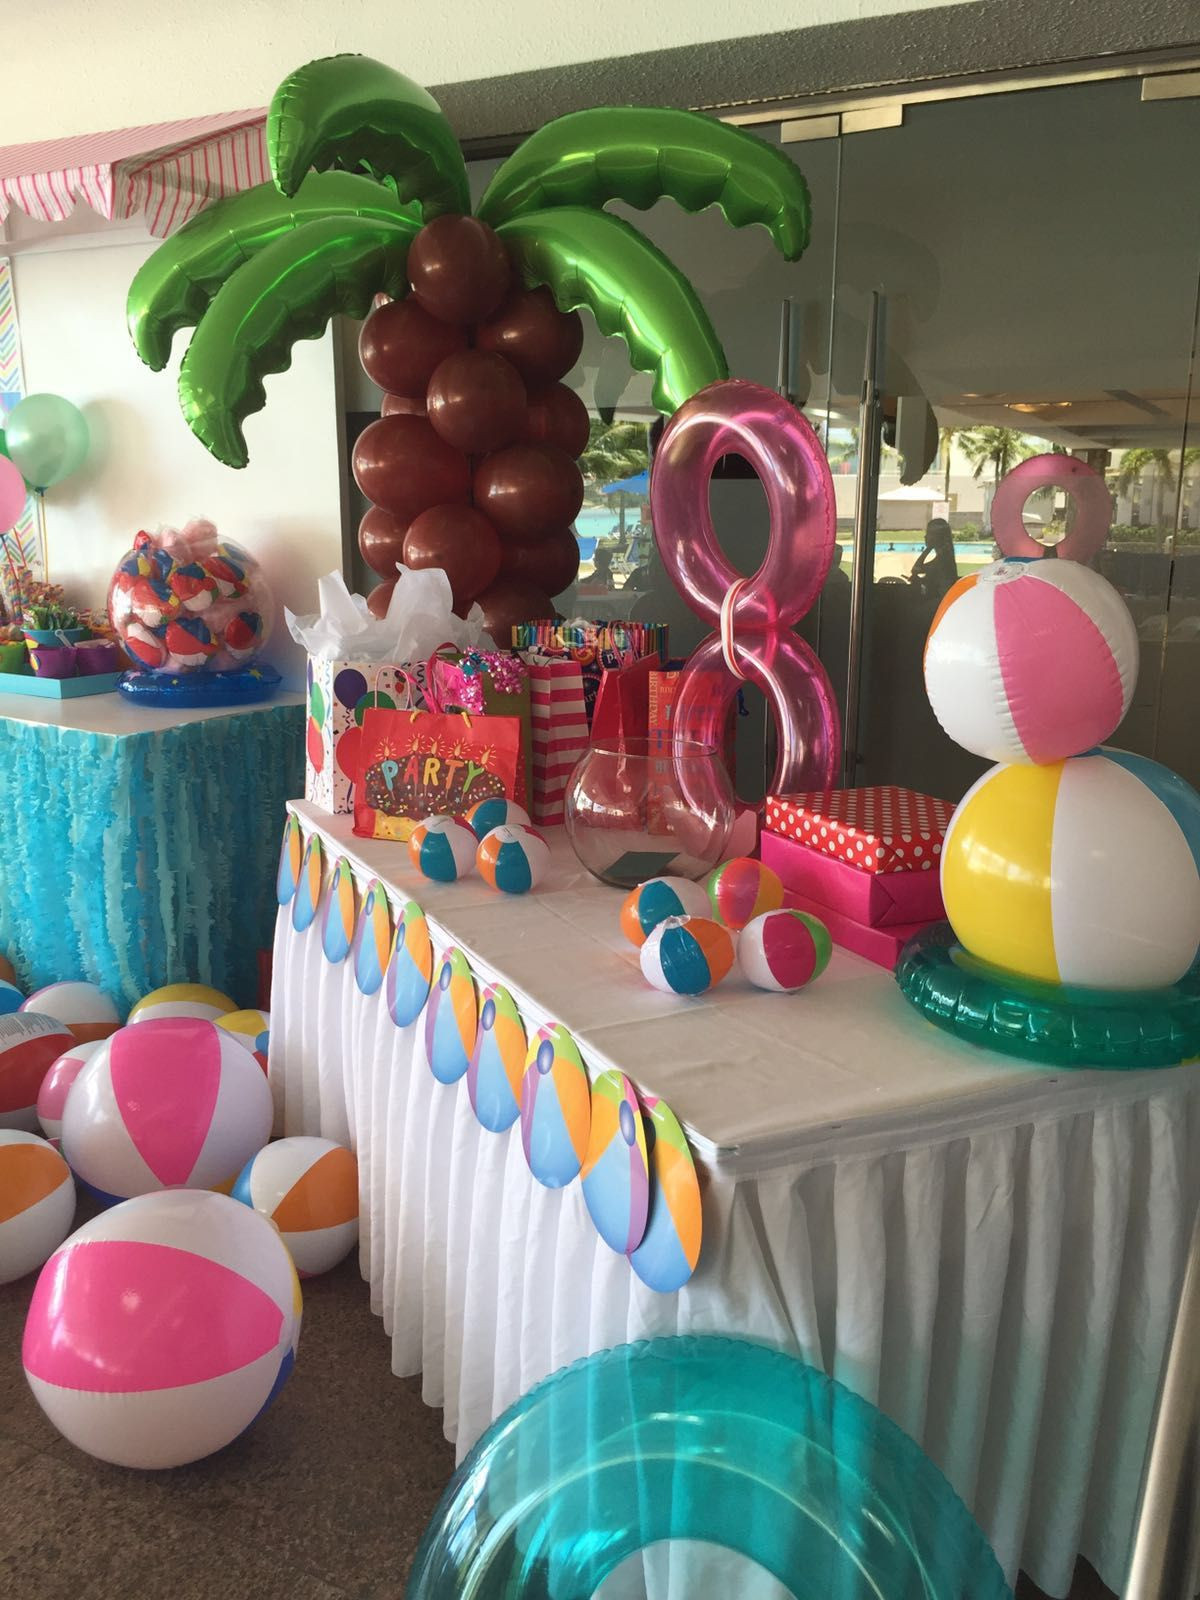 Pool Party Ideas For 2 Year Old
 Balloon coconut tree added to enhance the pool party theme